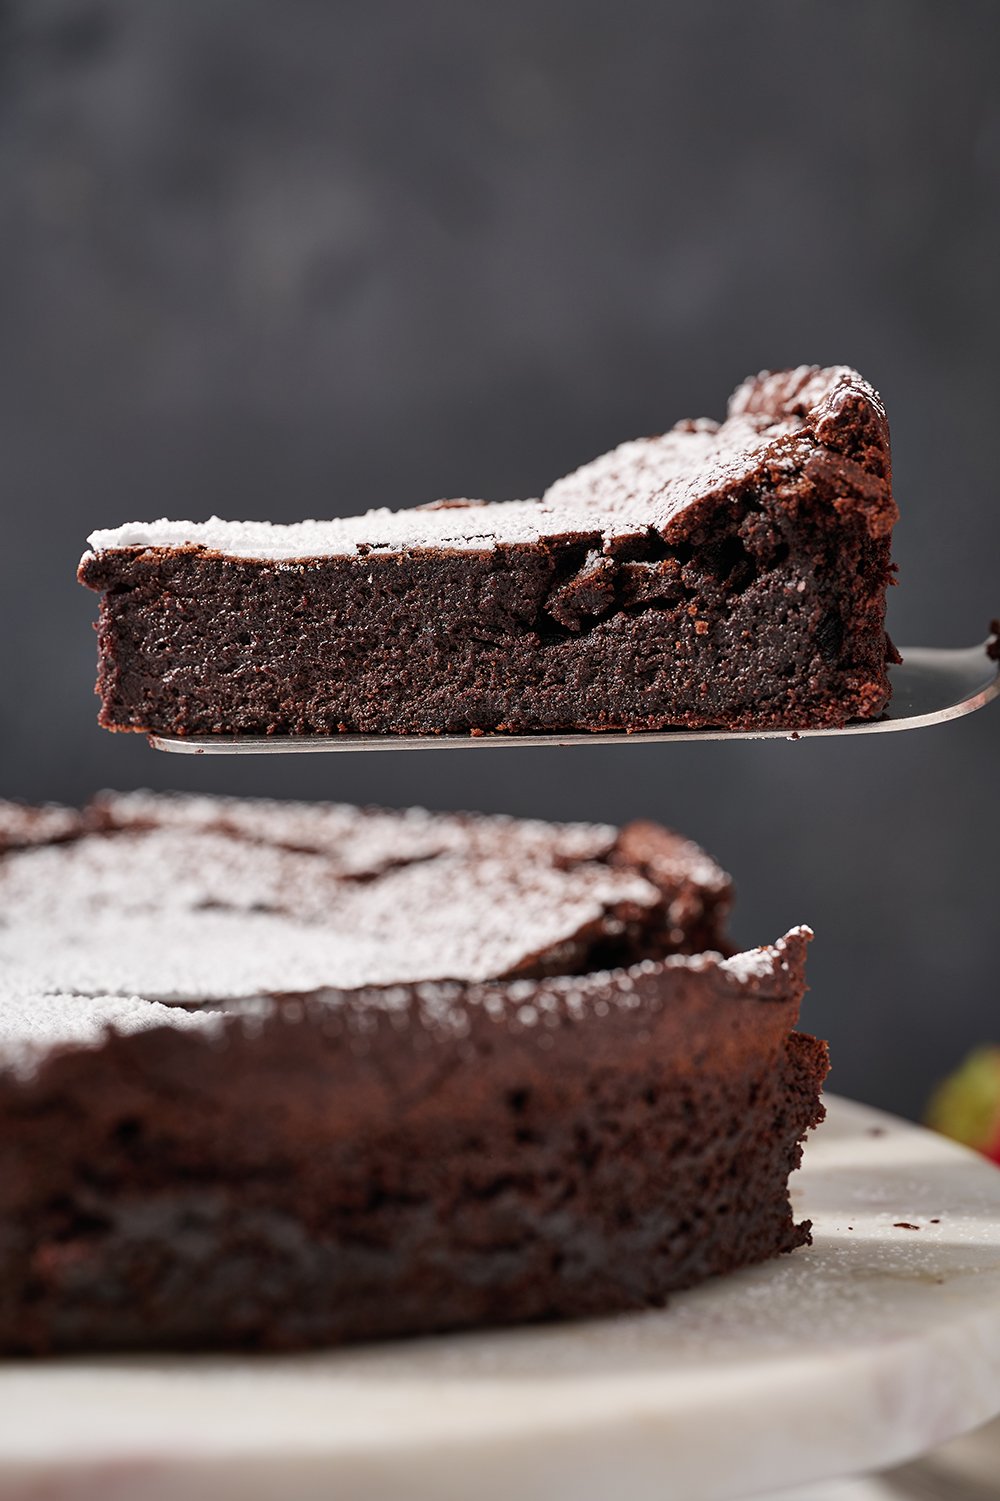 Flourless Olive Oil Chocolate Cake Recipe: How to Make It